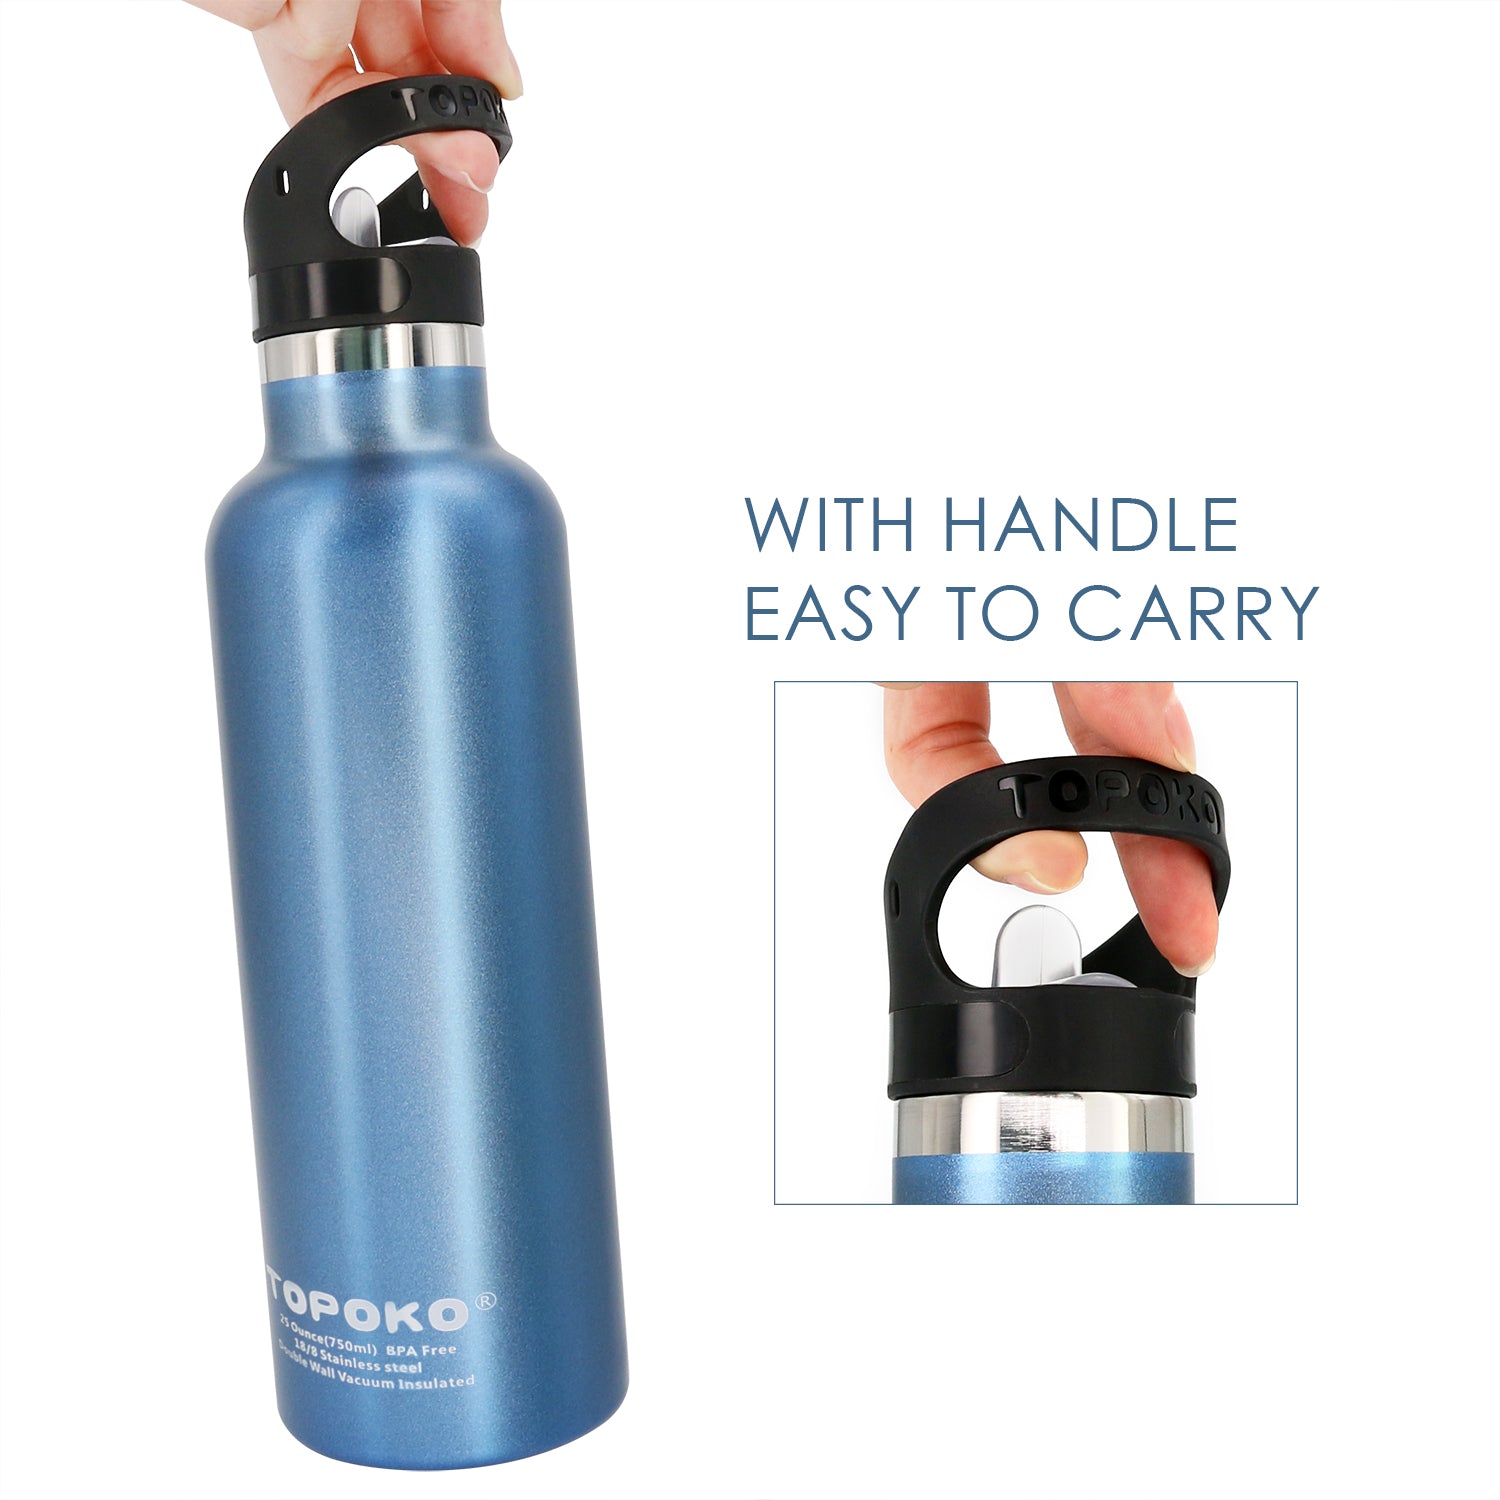 Hydro Flask Insulated Stainless Steel Water Bottle 24-Ounce